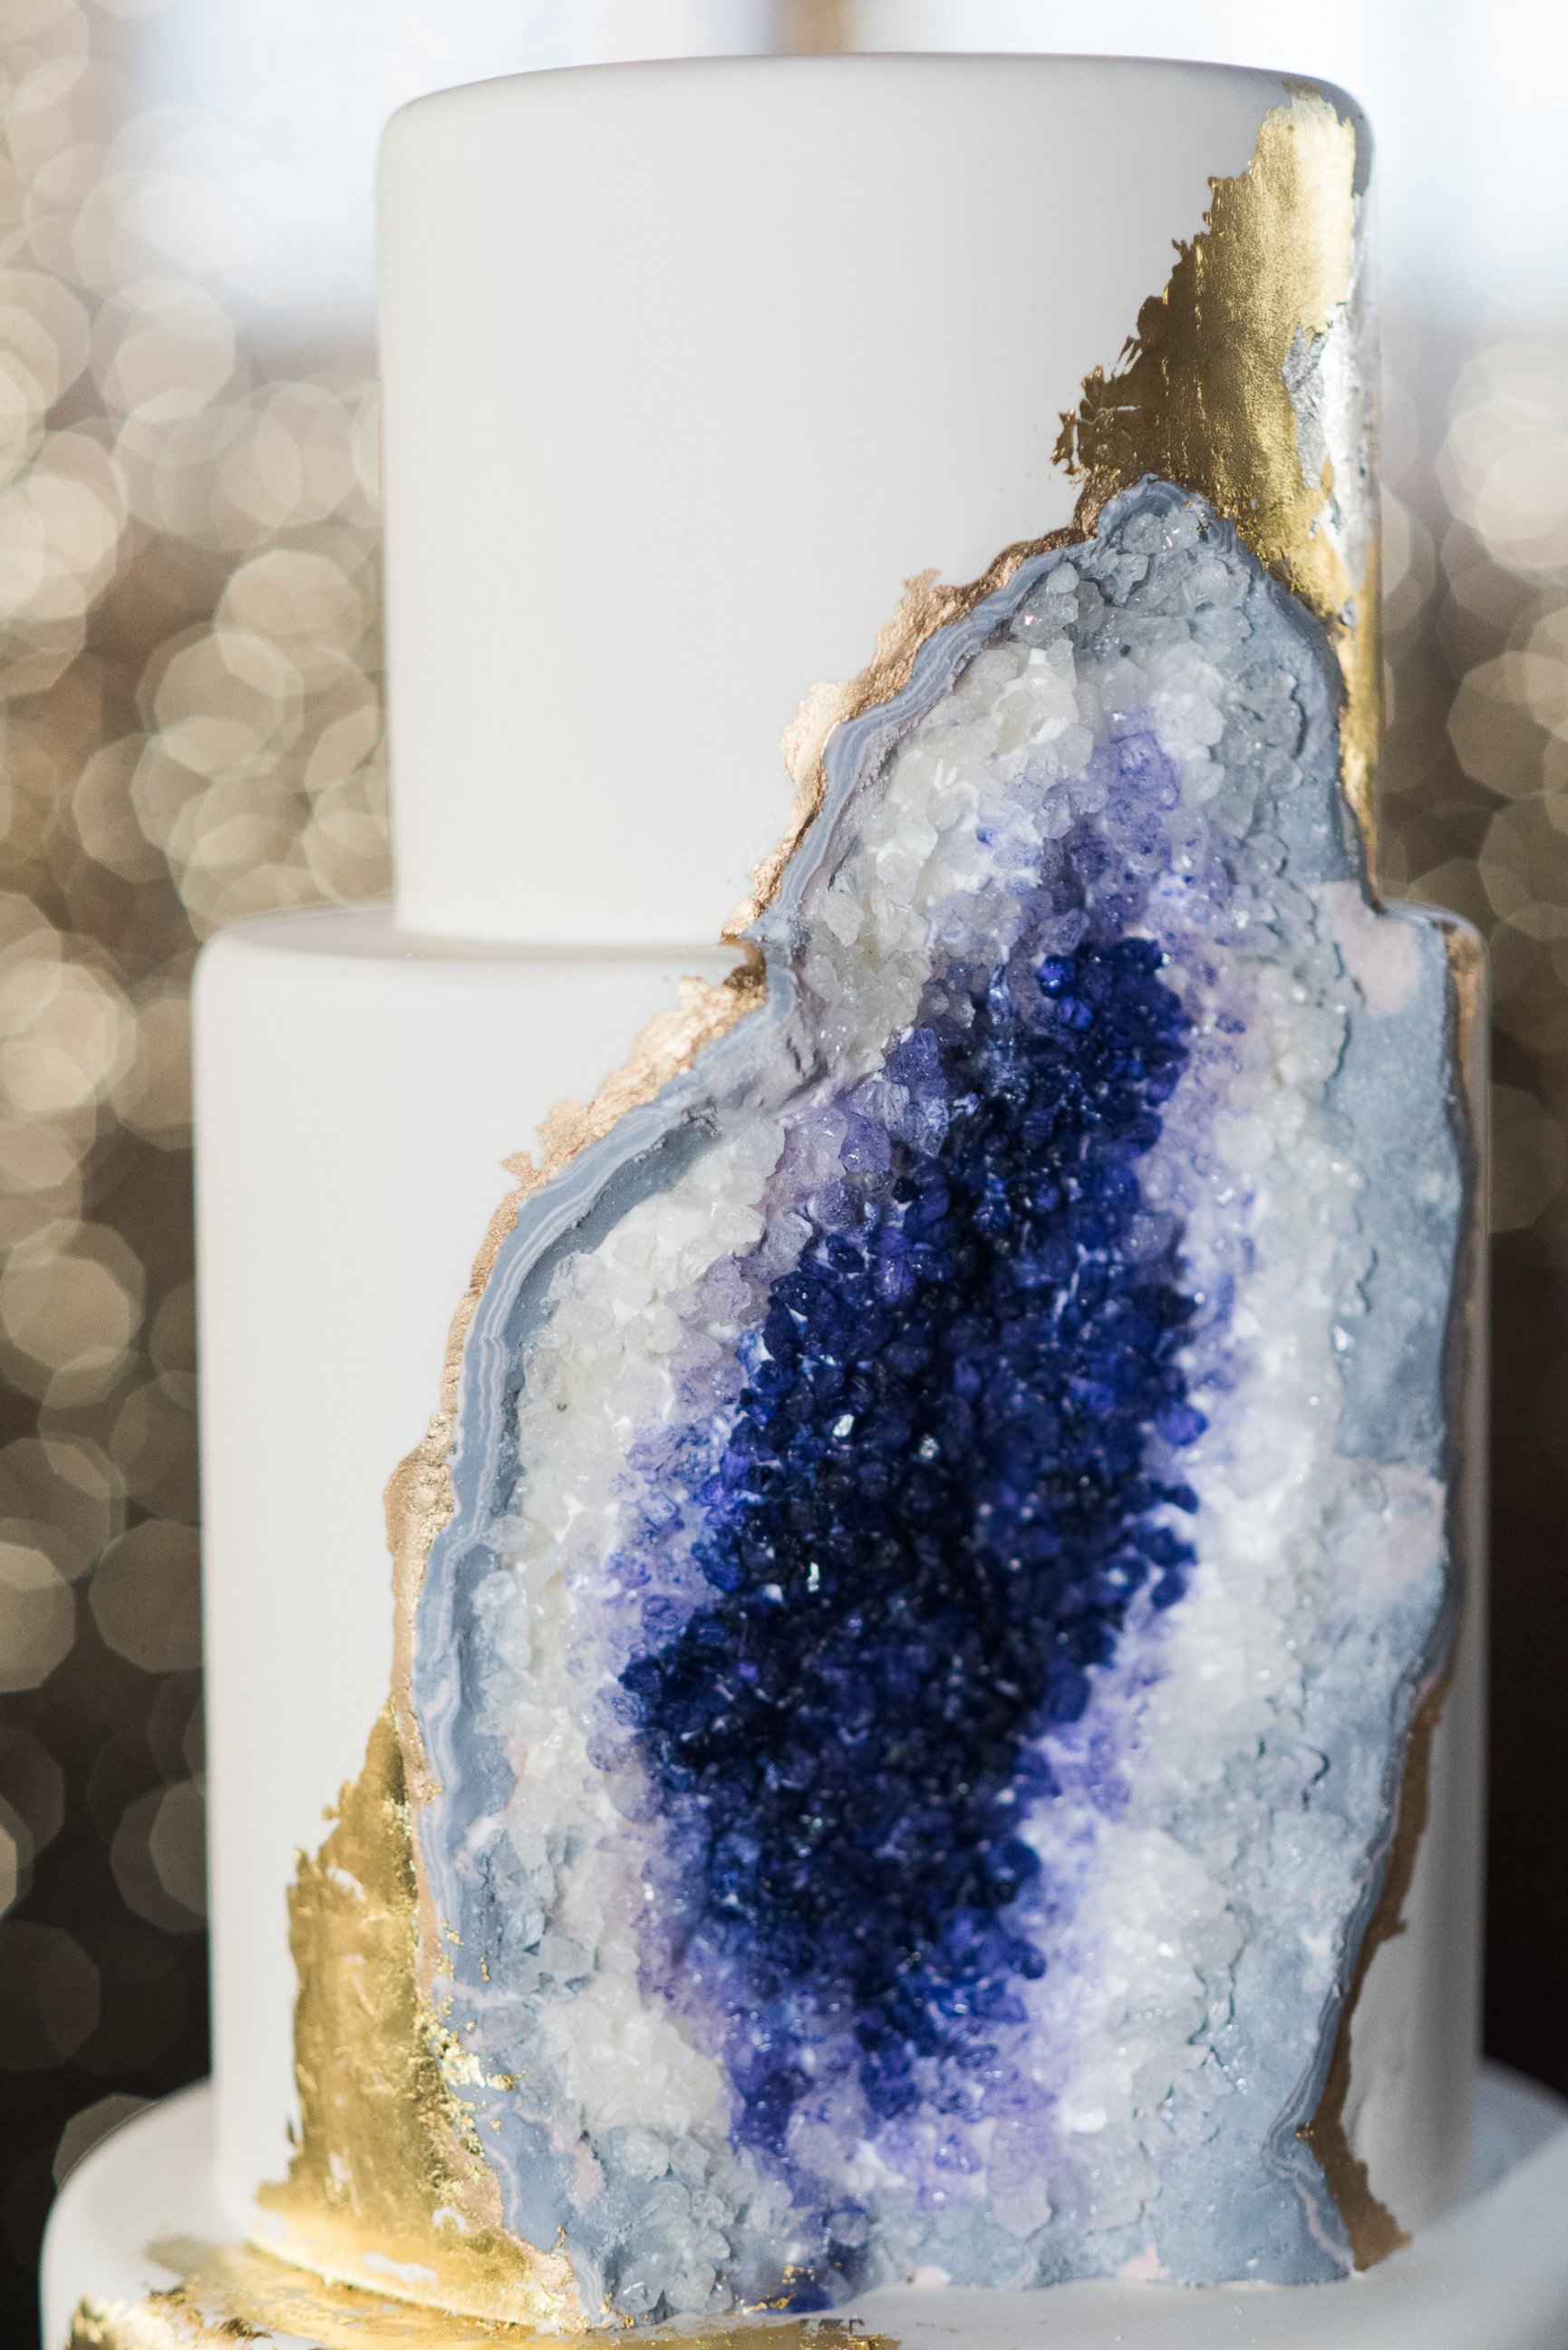 PHOTO: Amethyst geode cake created by Rachael Teufel that sparked a new wedding cake trend.